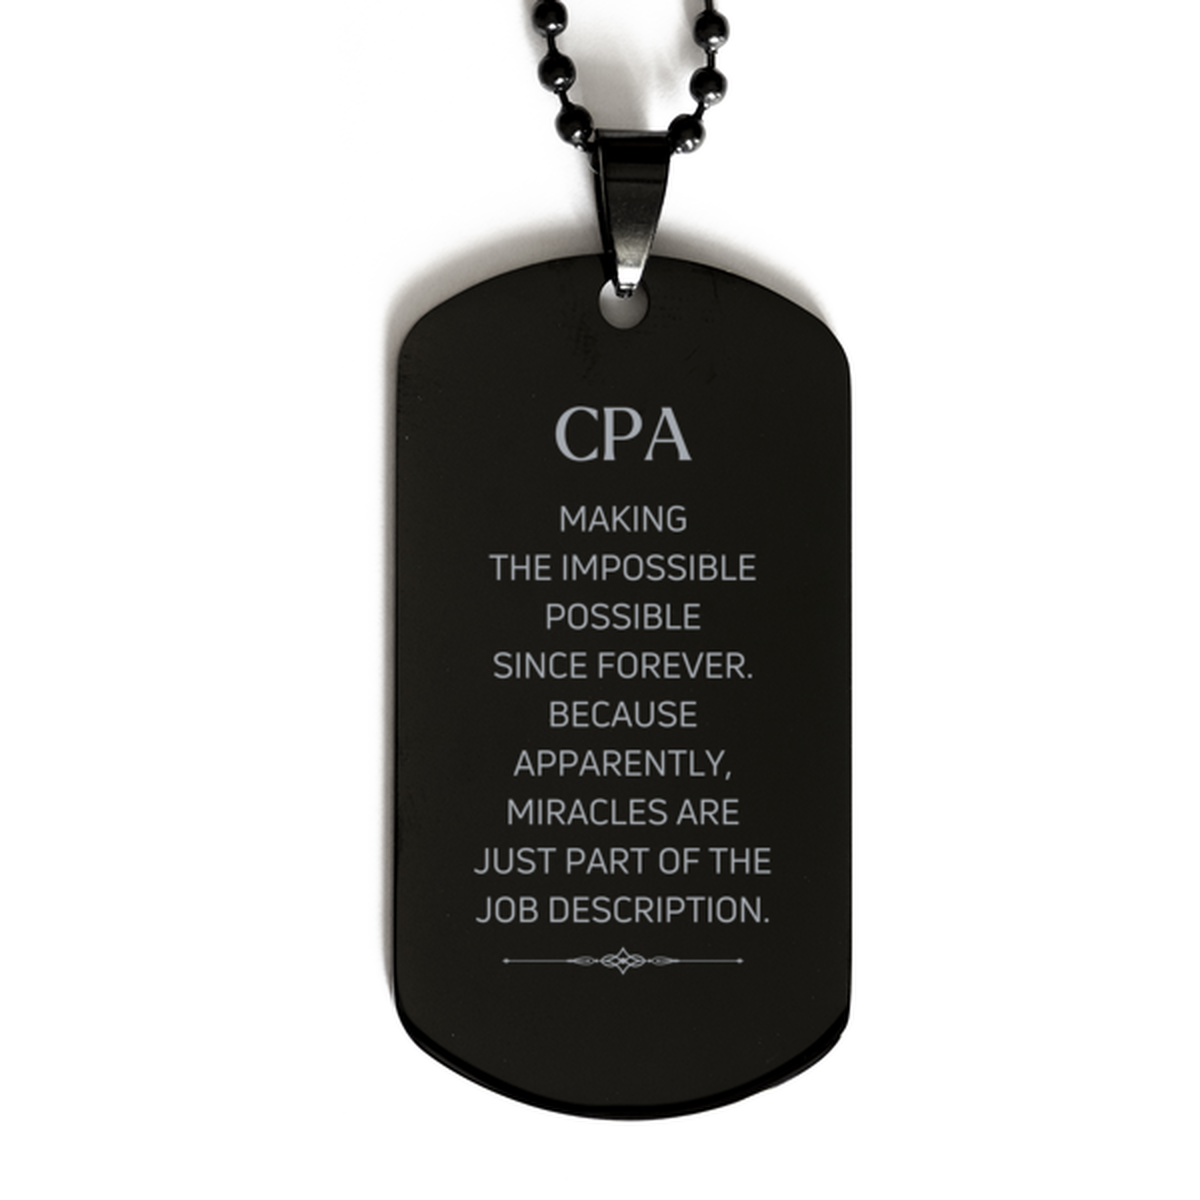 Funny CPA Gifts, Miracles are just part of the job description, Inspirational Birthday Black Dog Tag For CPA, Men, Women, Coworkers, Friends, Boss